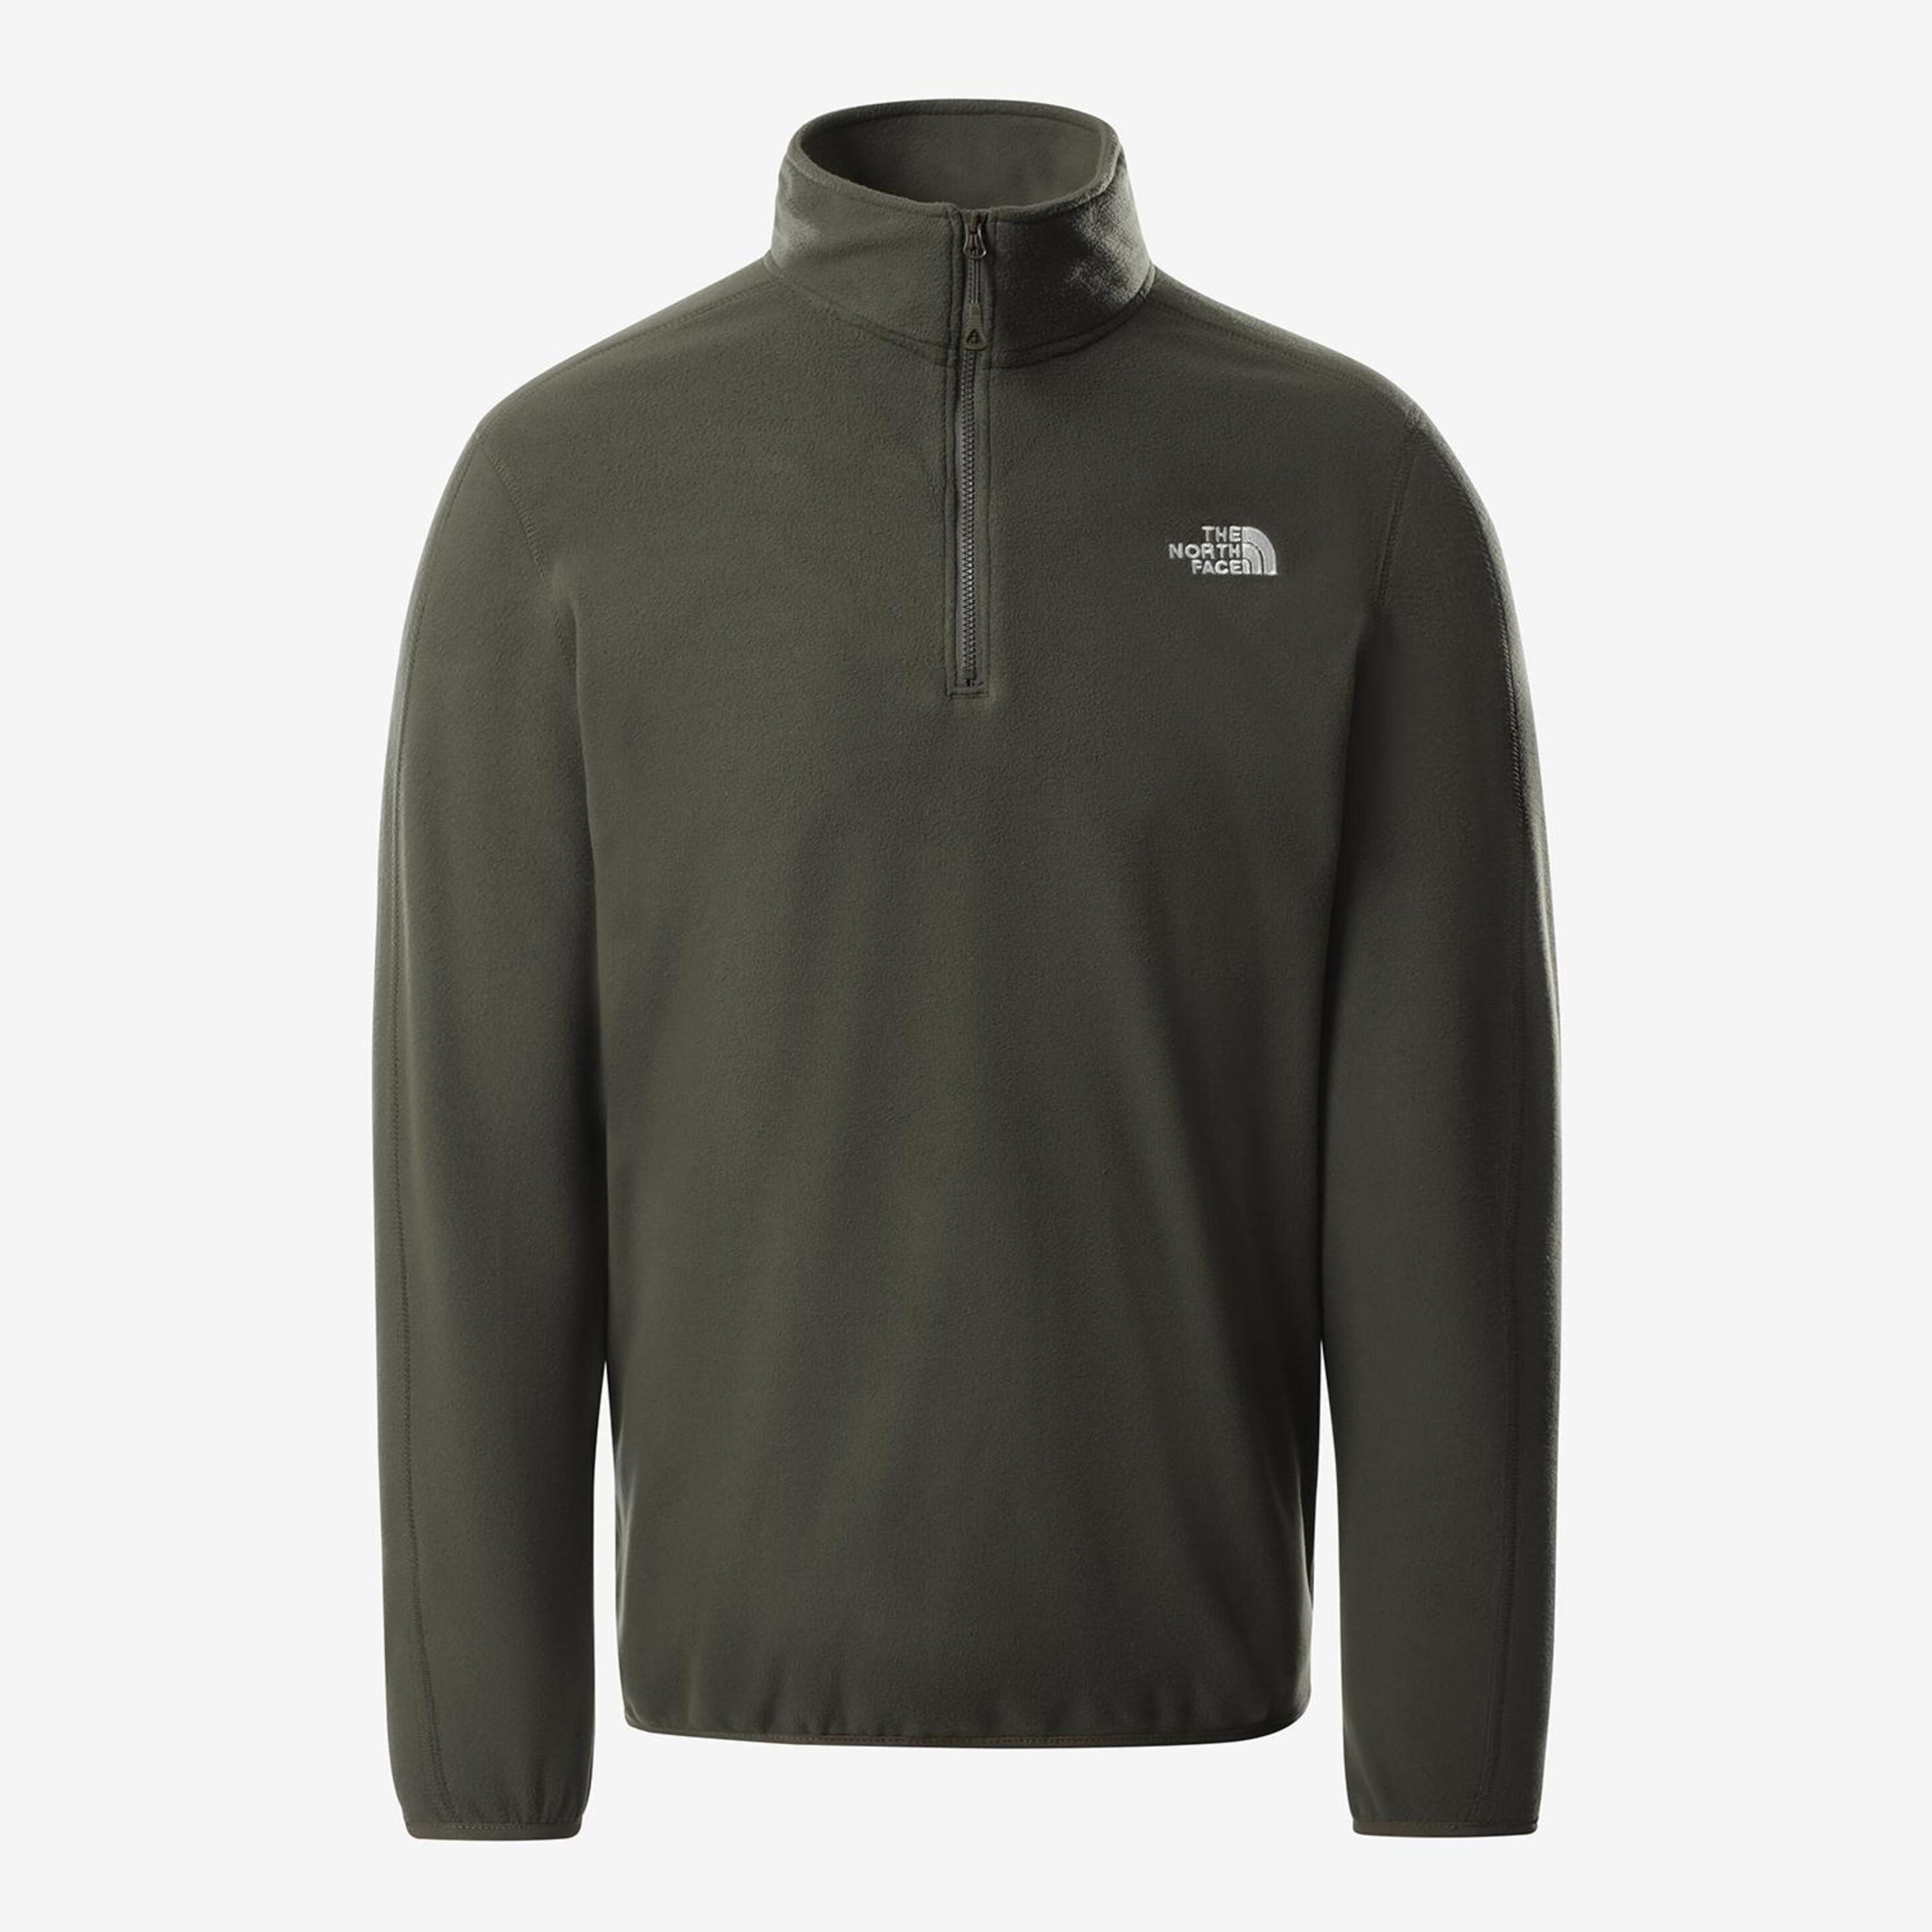 The North Face Resolve